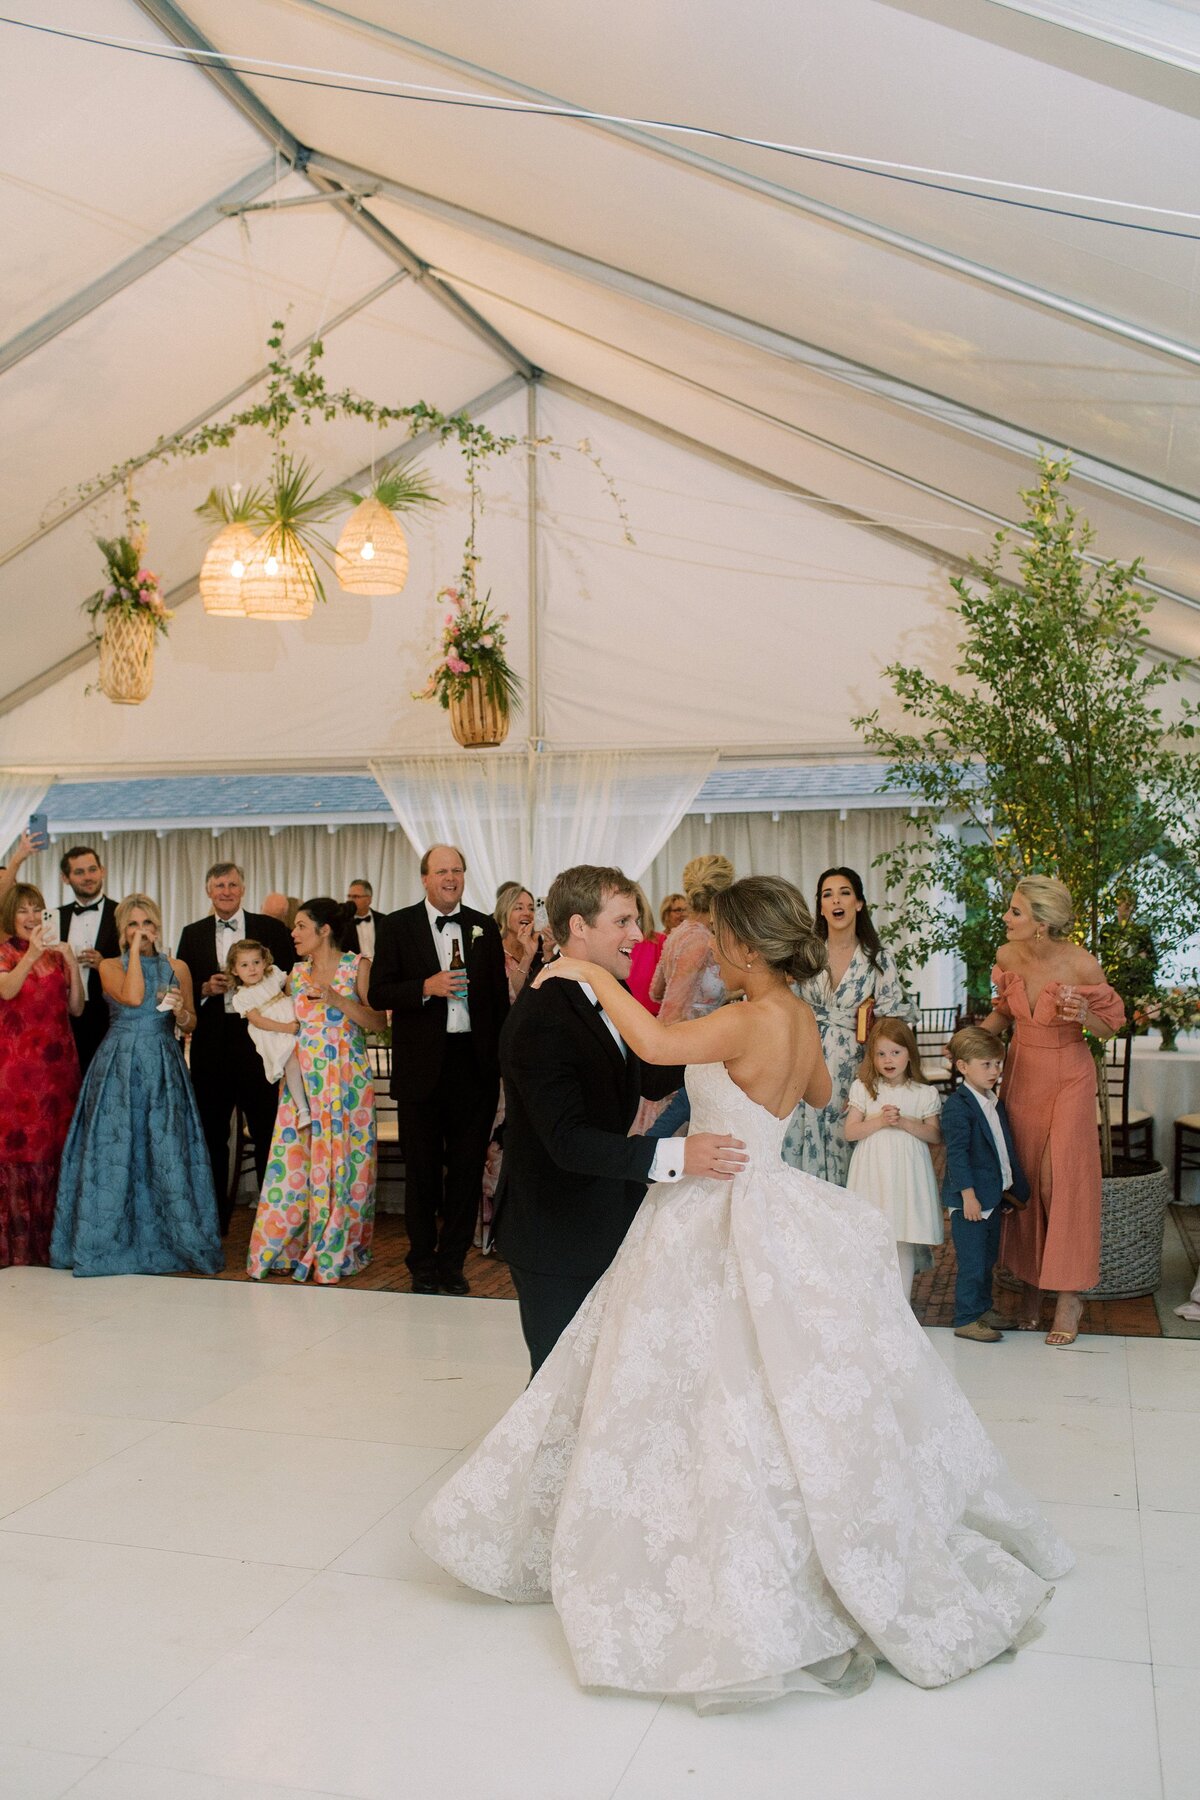 Bride and groom have their first dance at their wedding reception